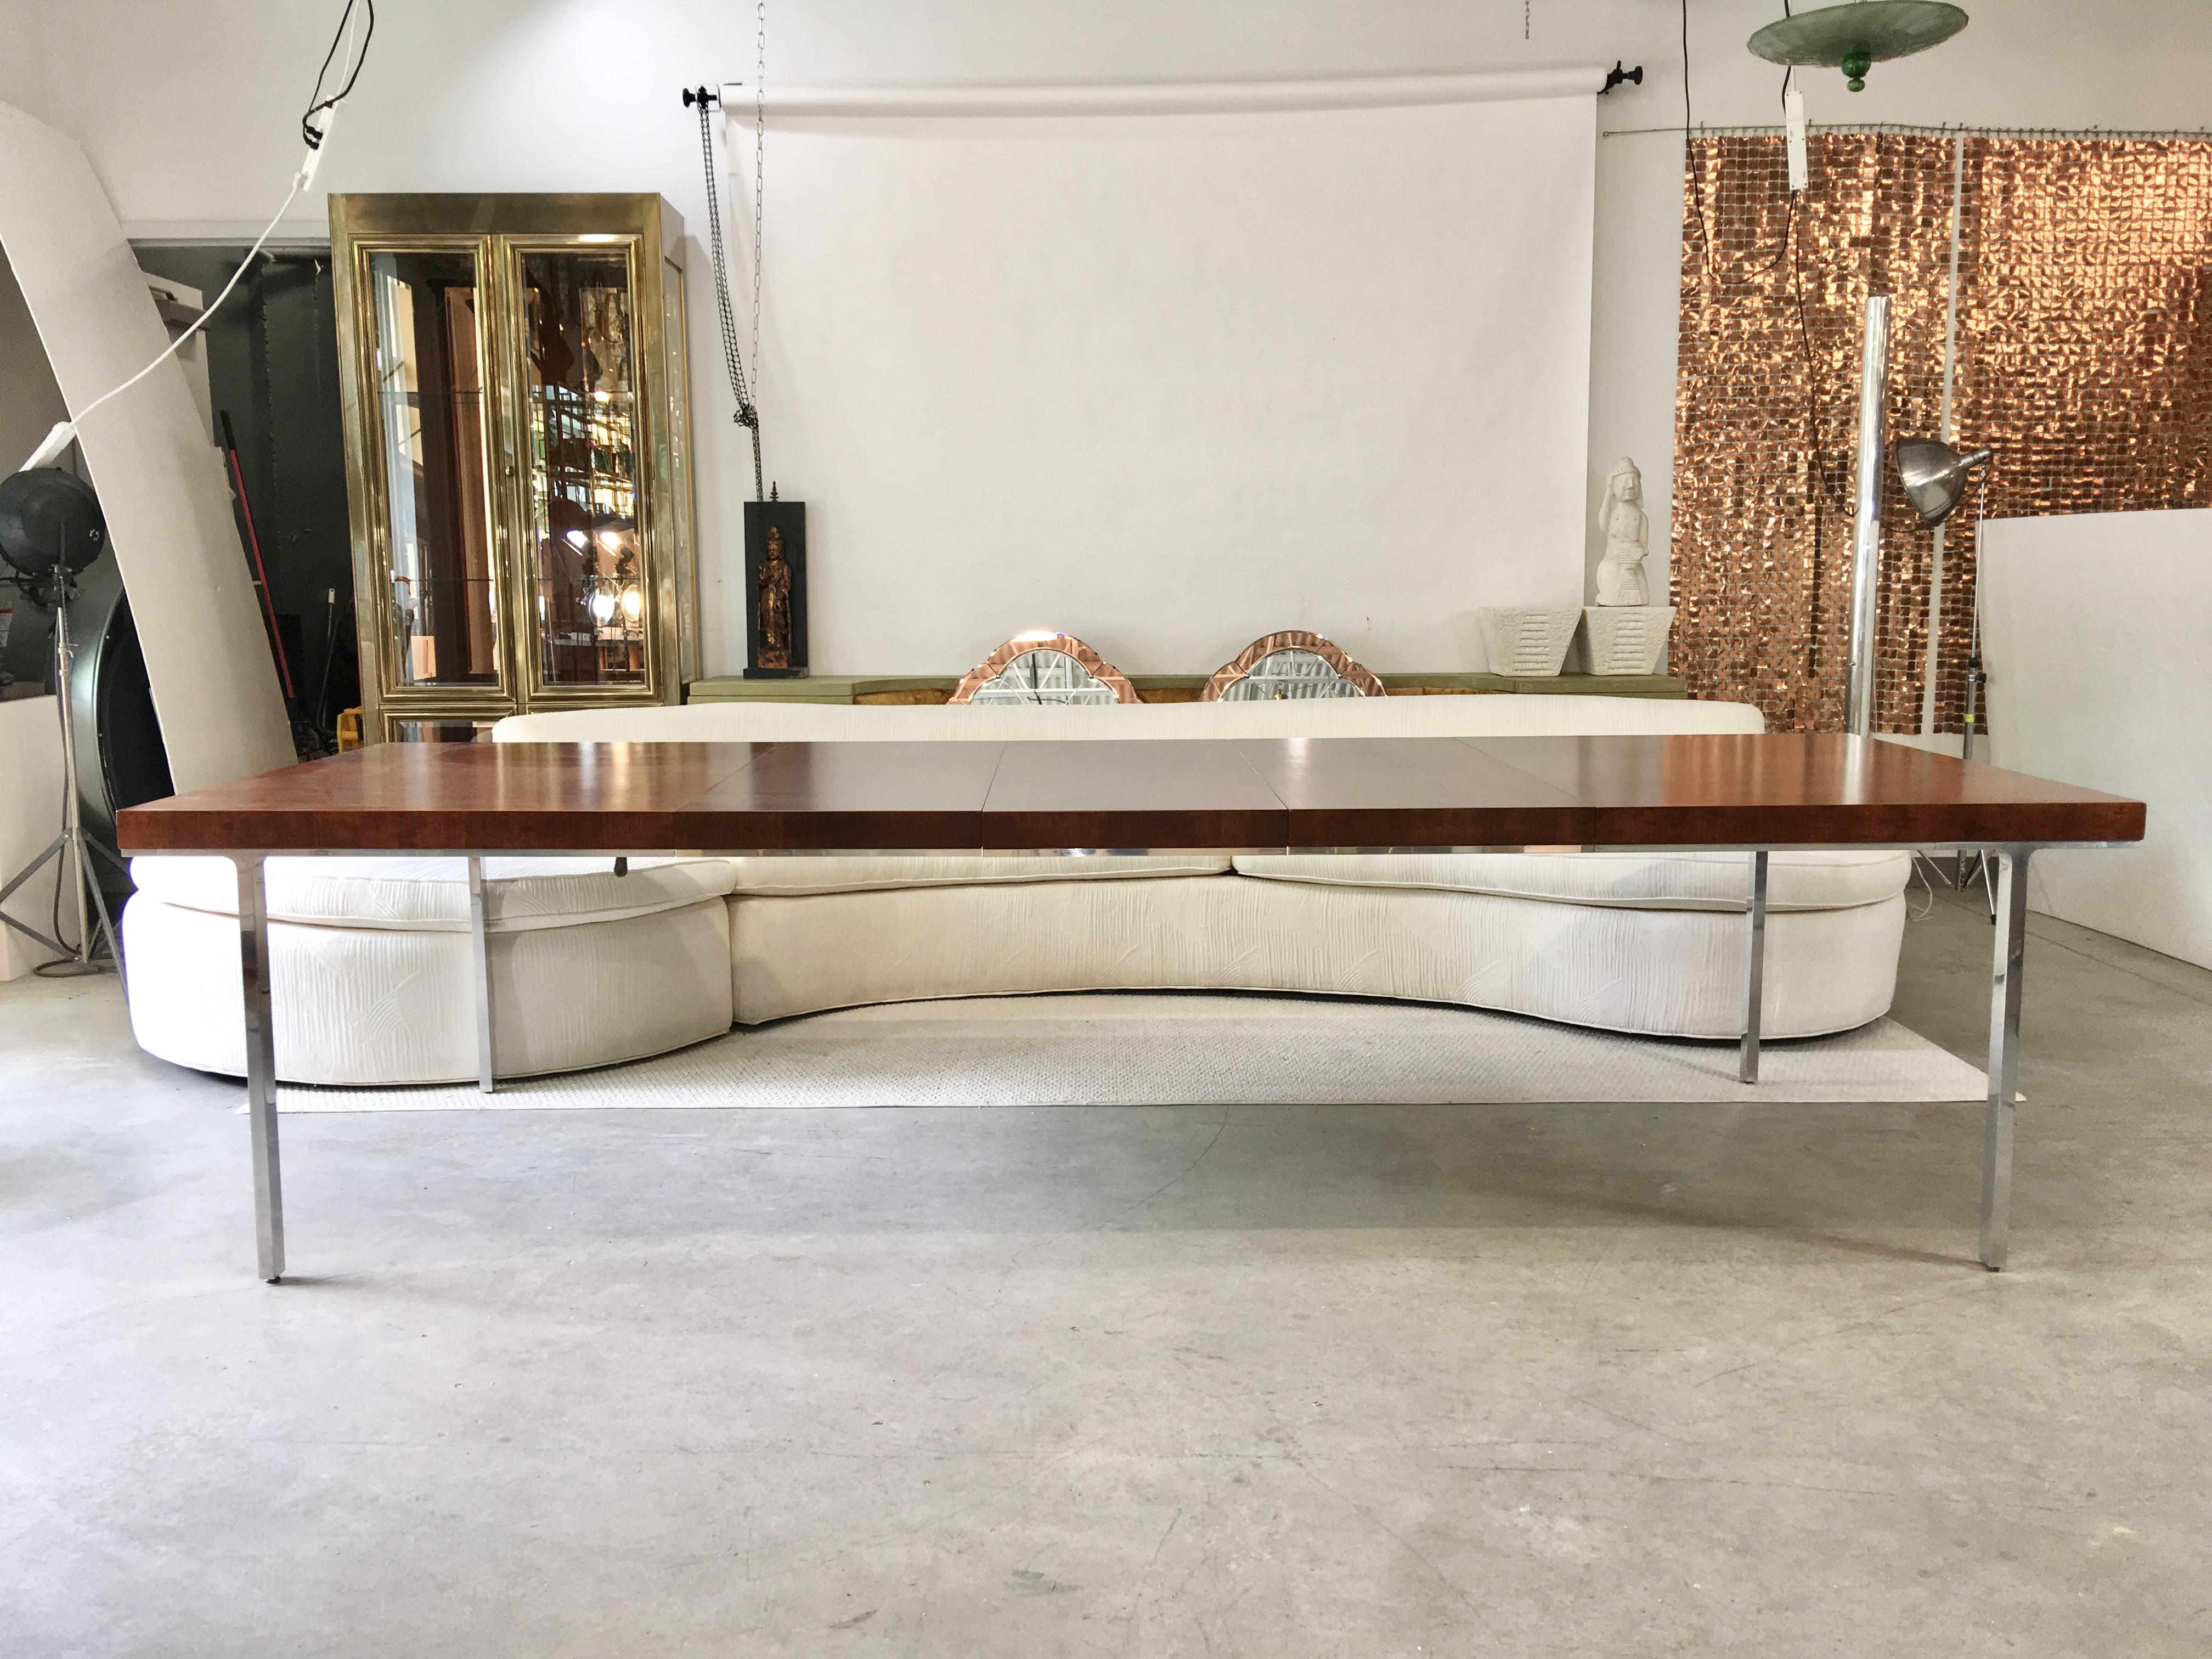 Minimalist clean lines on this 1960s dining table by John Stuart with mirror-polished cast aluminum legs. 
Measures: 29